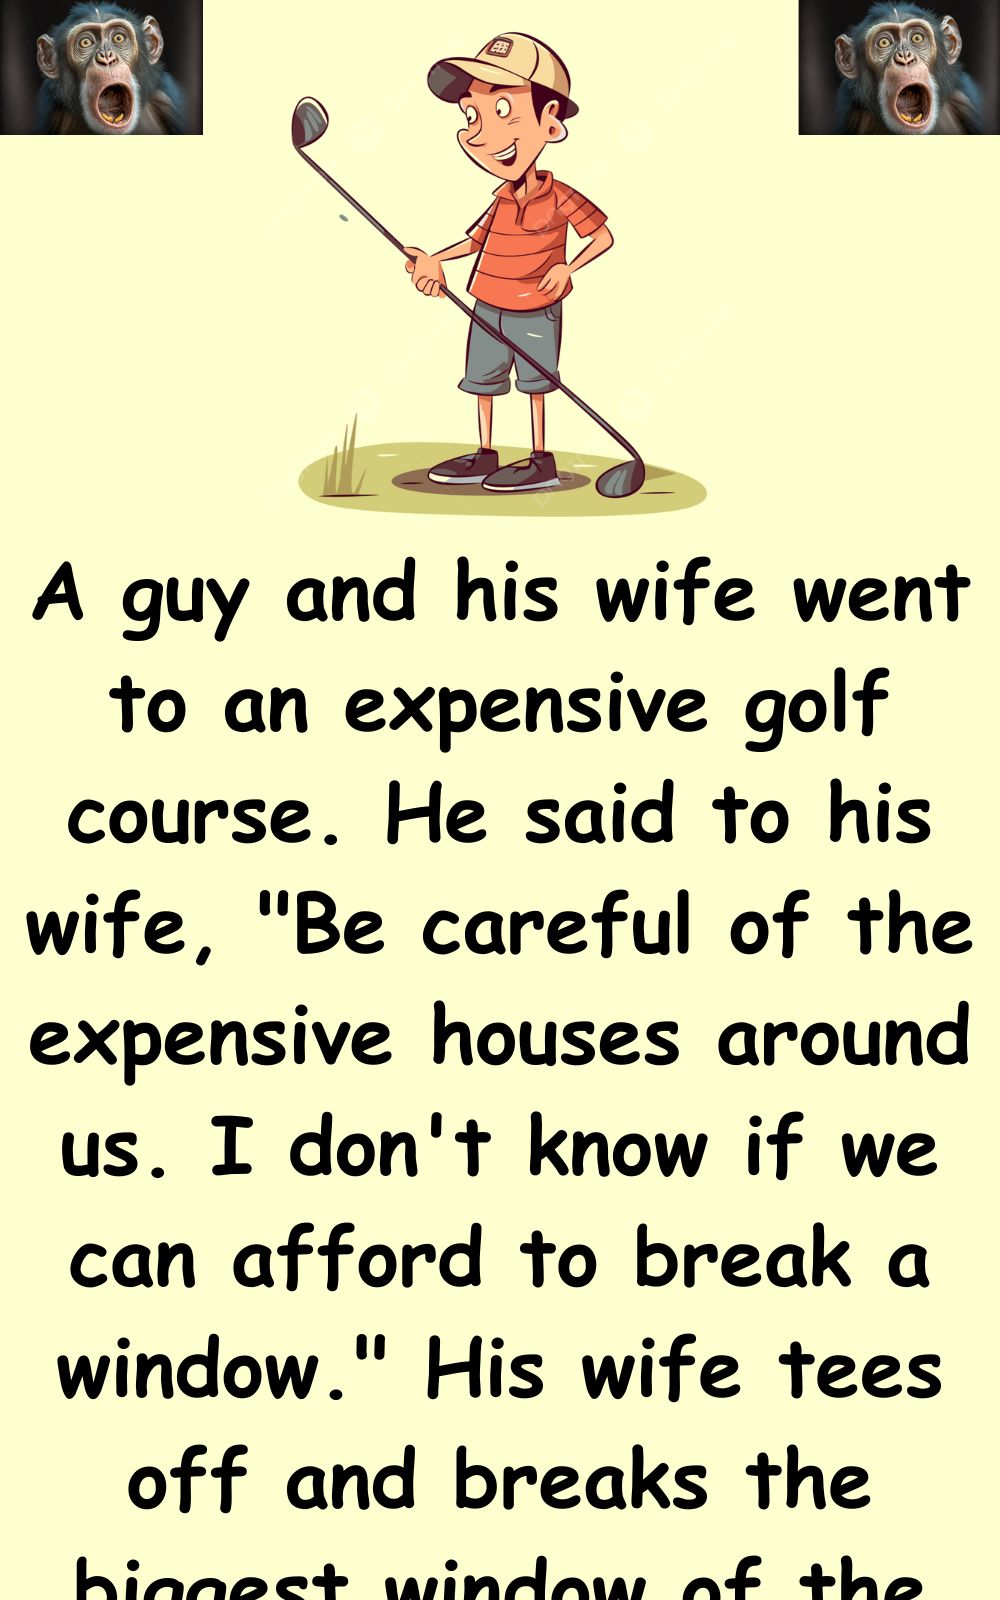 A guy and his wife went to an expensive golf course